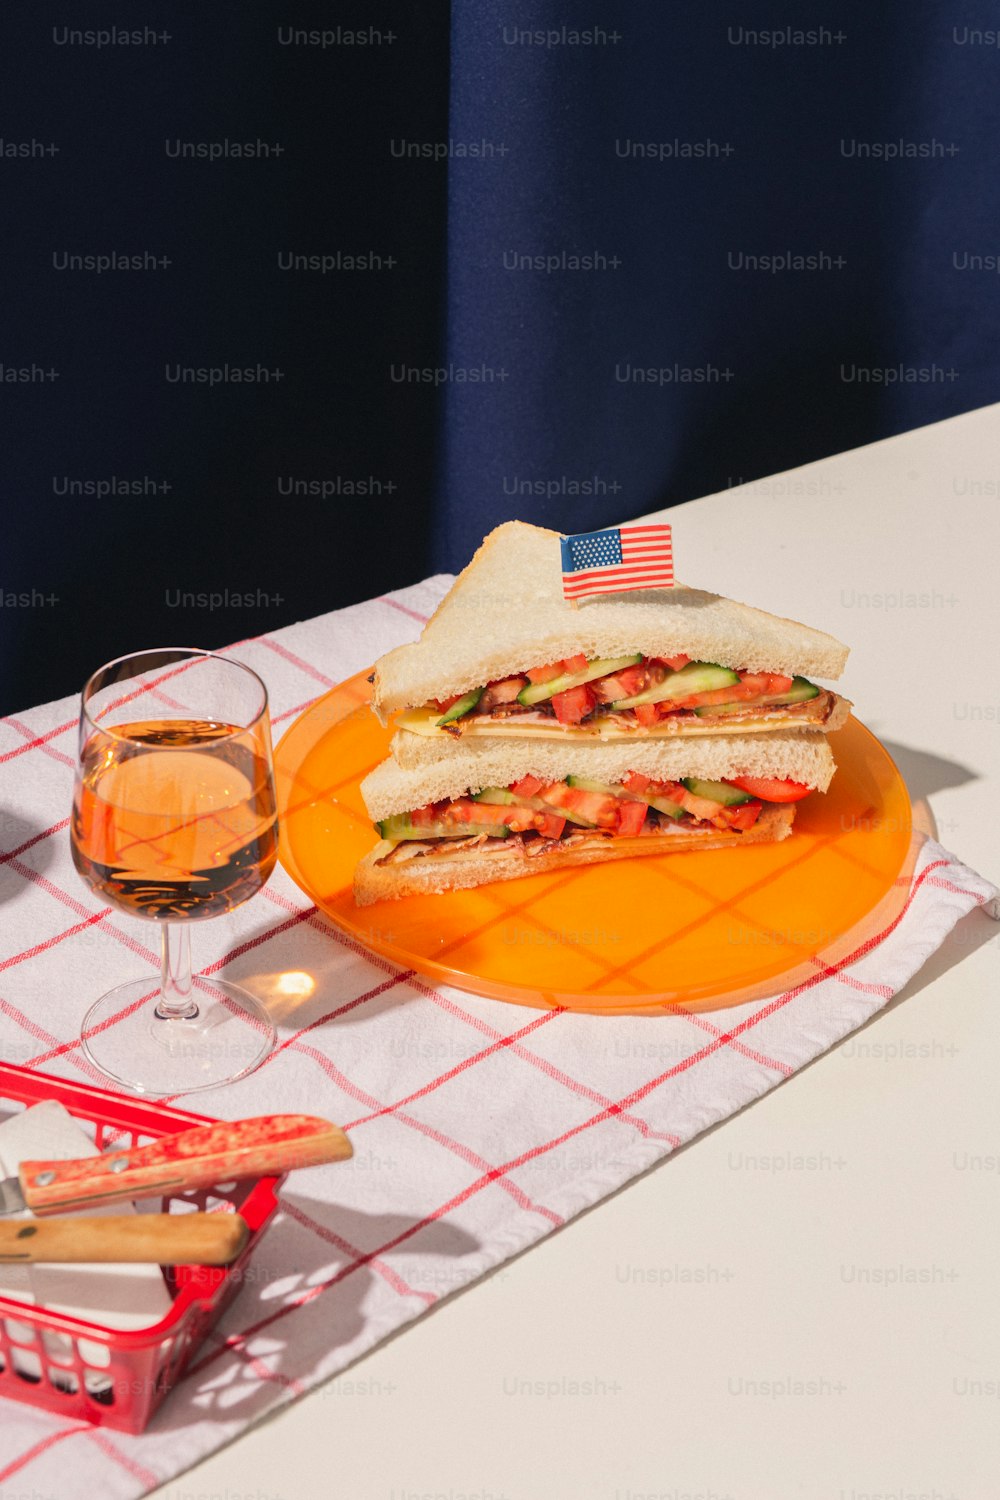 a plate with a sandwich and a glass of wine